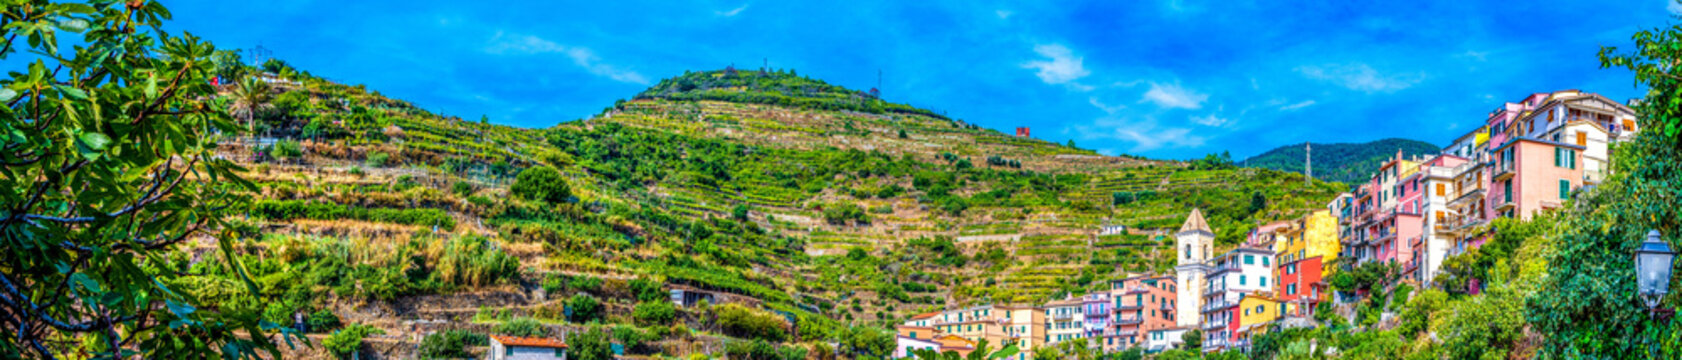 Panoramic view colorful houses with storied vineyards background in Manarola Village Italy